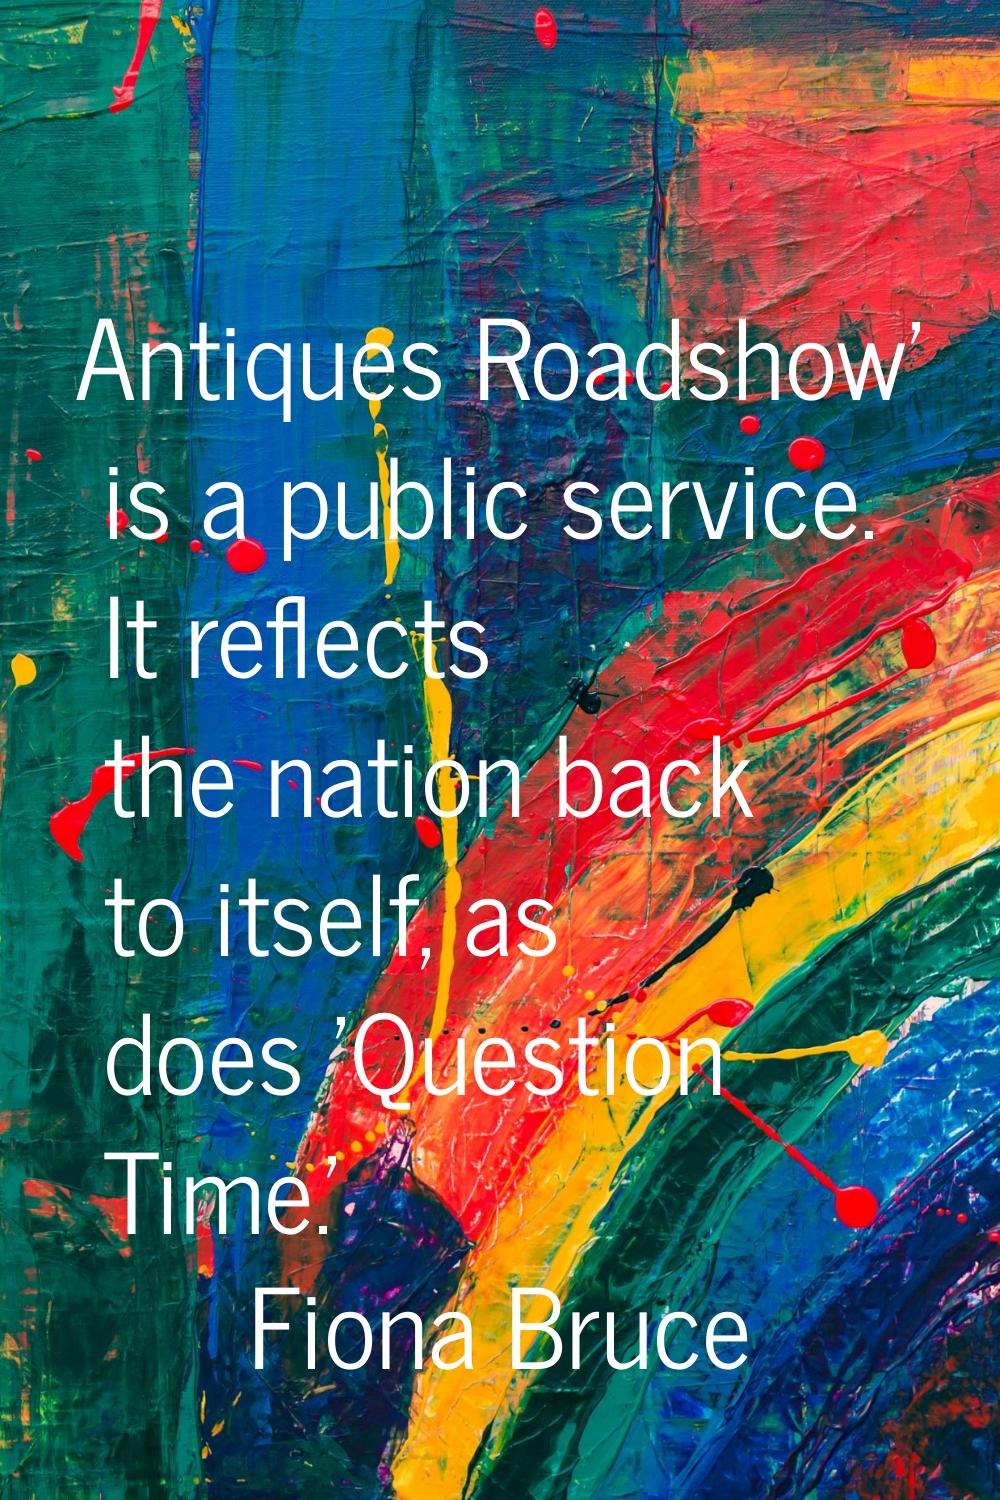 Antiques Roadshow' is a public service. It reflects the nation back to itself, as does 'Question Ti